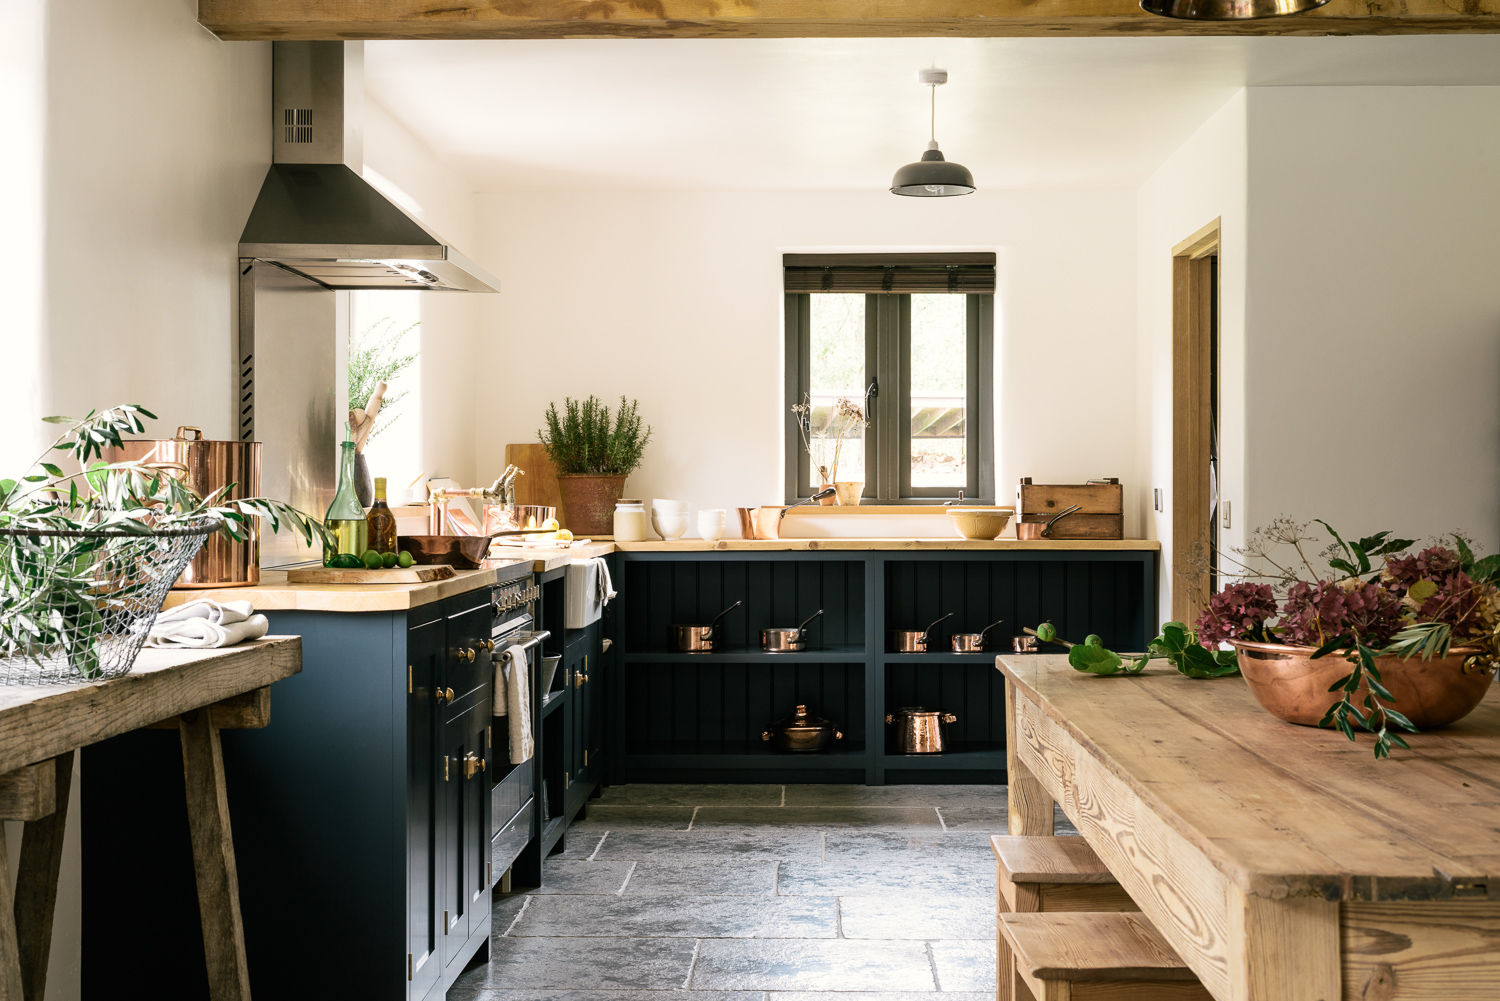 The Leicestershire Kitchen in the Woods by deVOL deVOL Kitchens カントリーデザインの キッチン